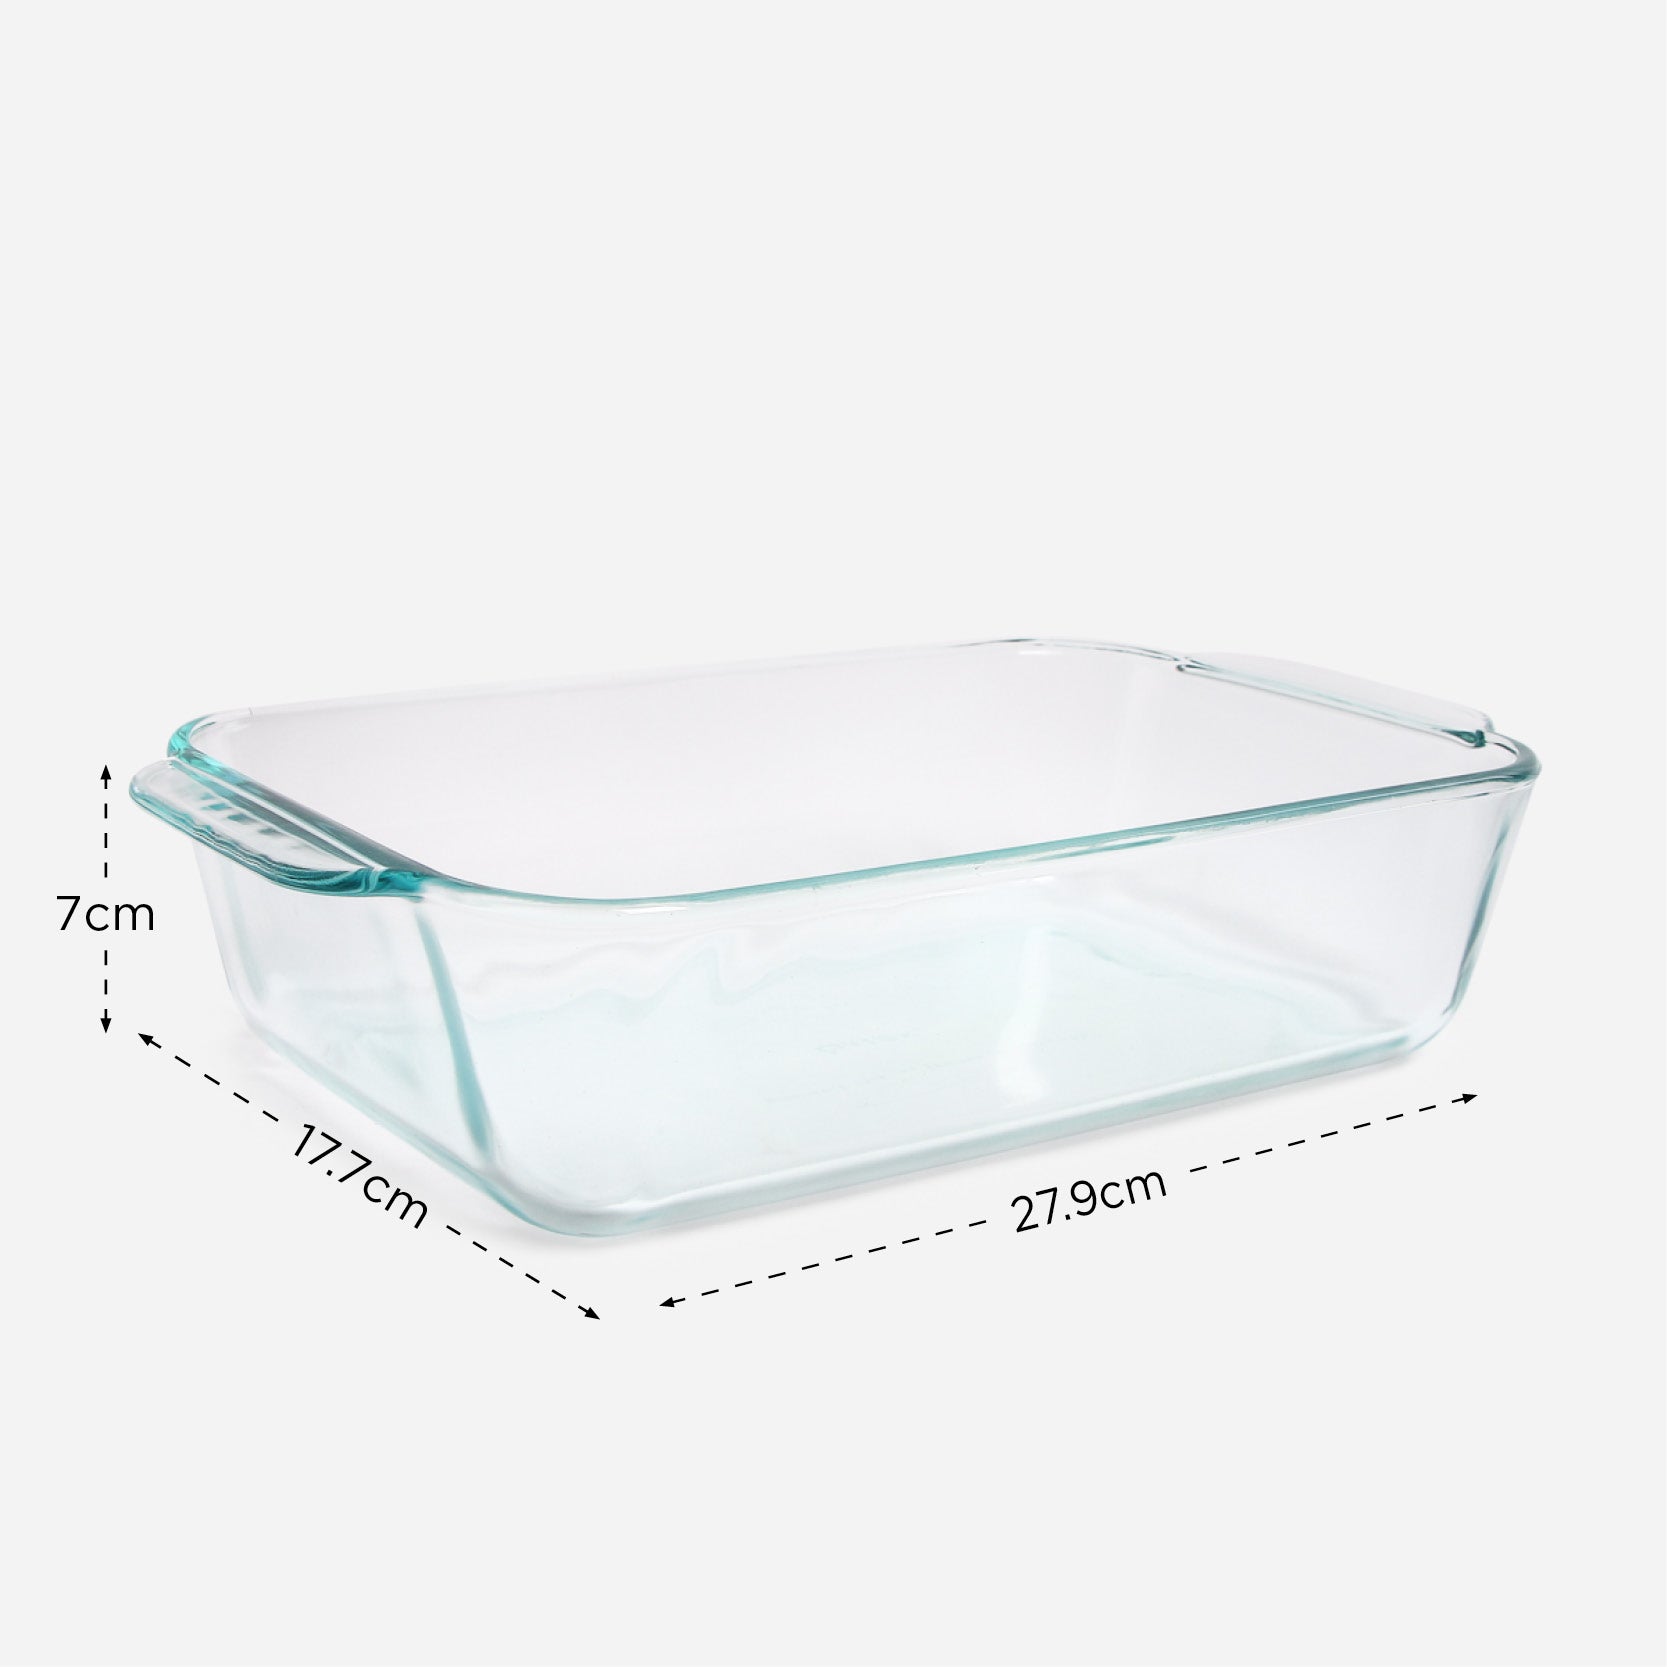 2 Pyrex baking dishes with handles and lids - 9x13 and 7x11